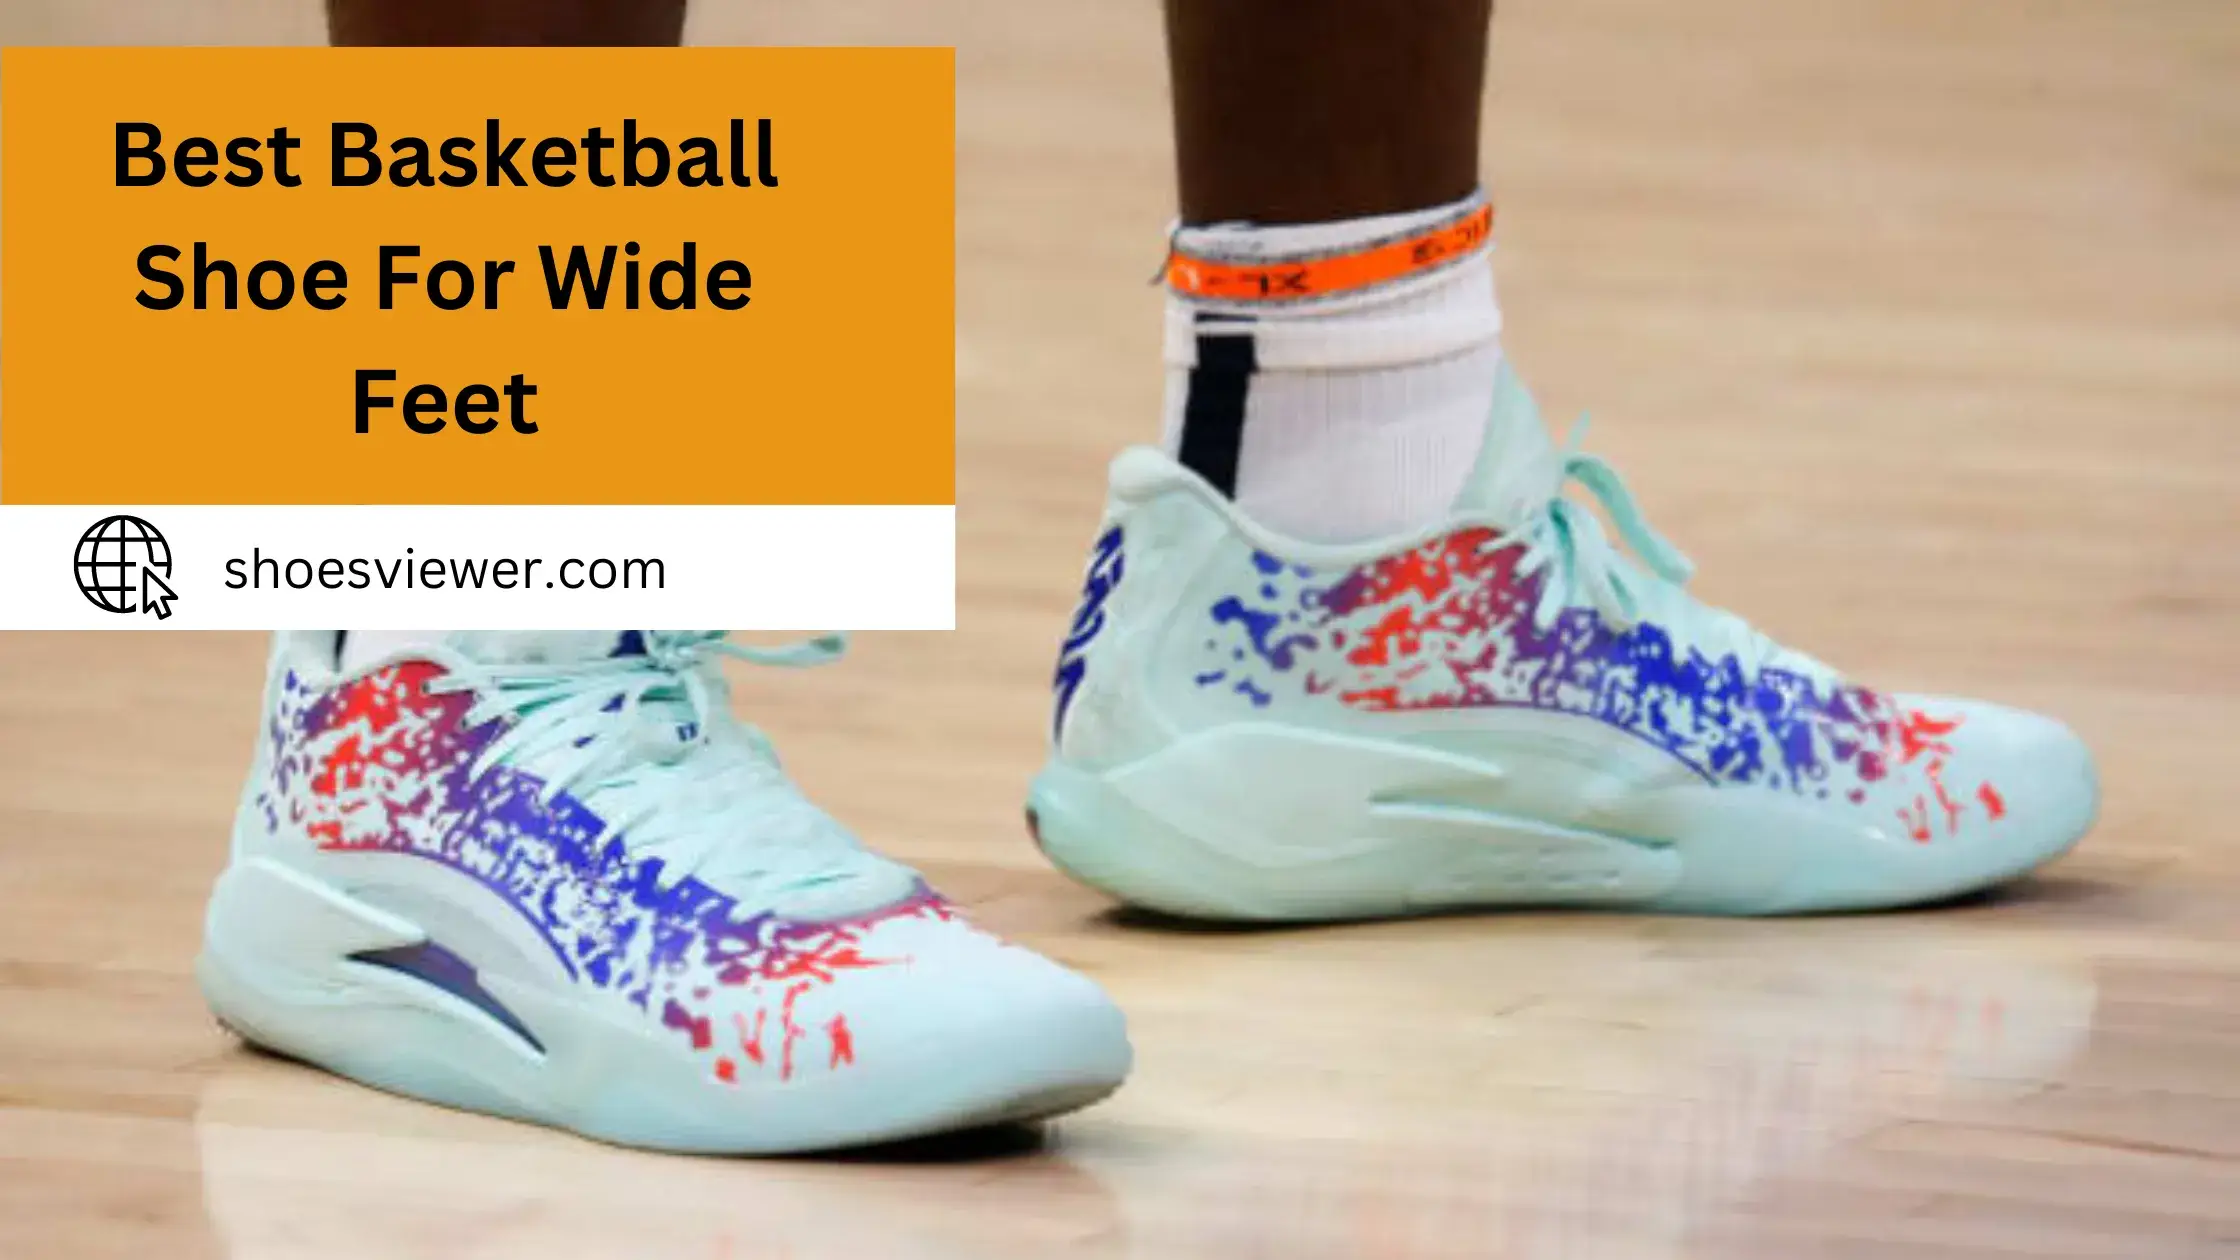 Unbiased Reviews of Top 10 Best Basketball Shoe For Wide Feet